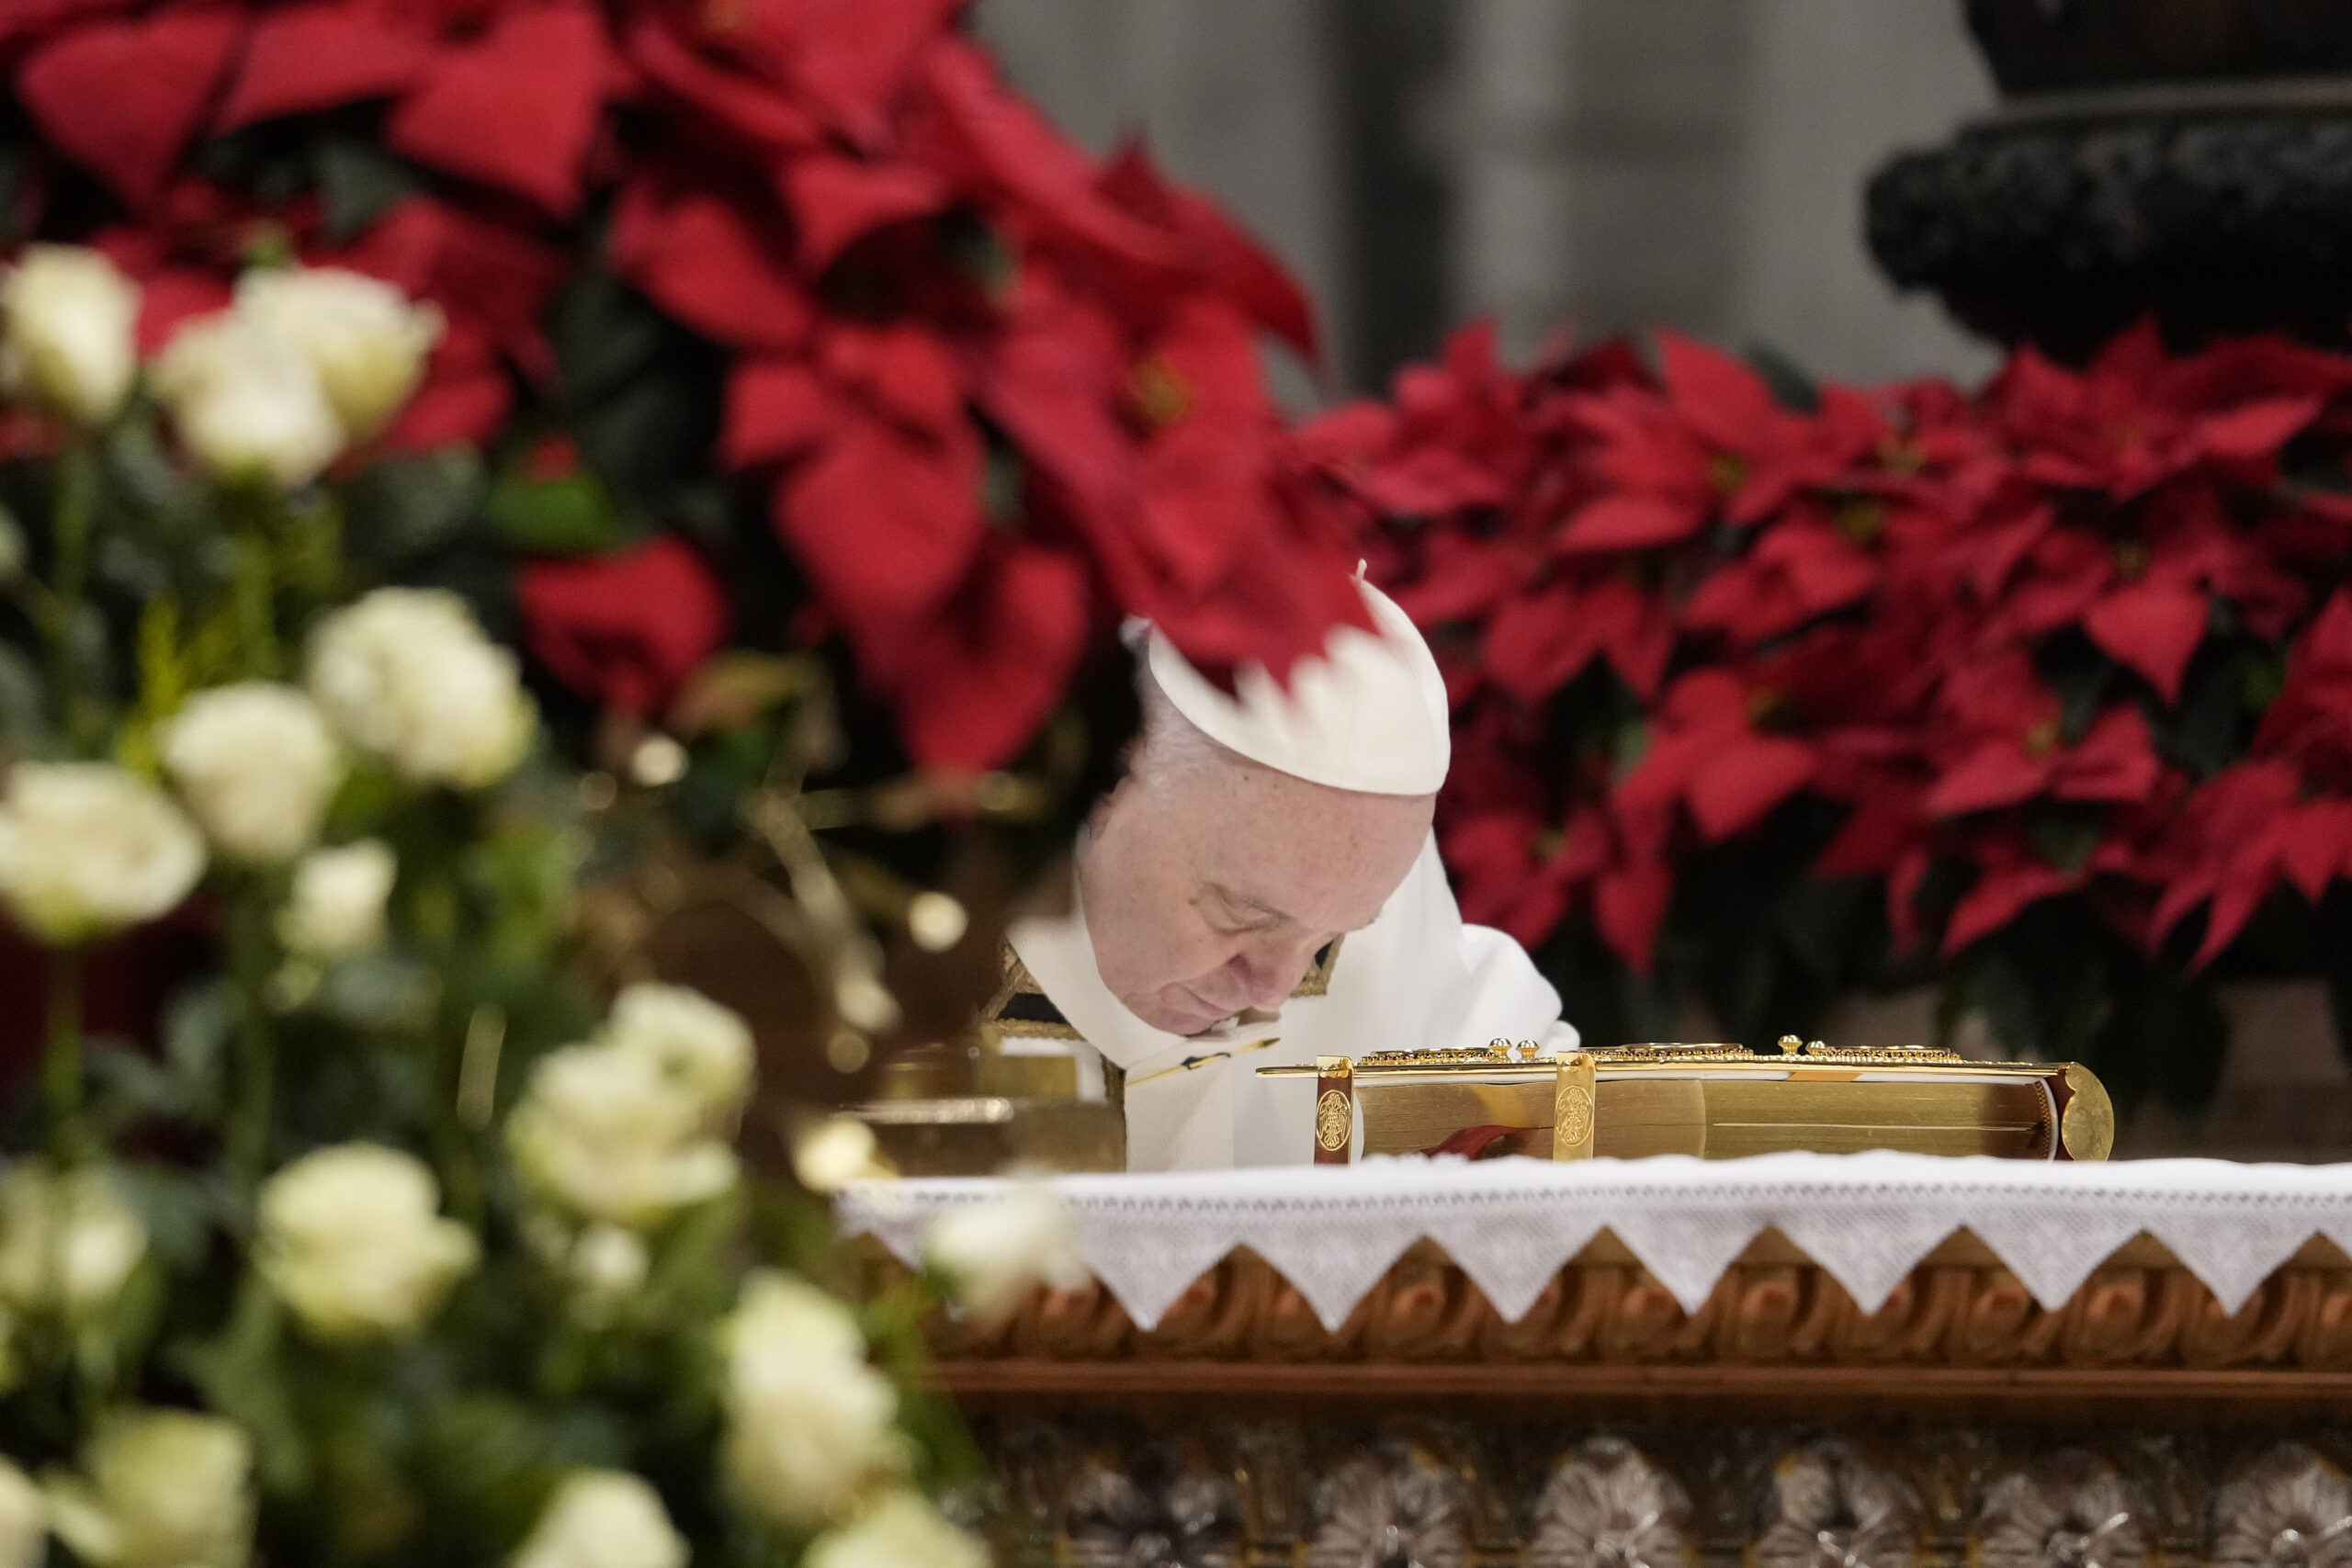 Pope Francis bows on the altar as he celebrates an Epiphany mass in St. Peter's Basilica, at the Vatican, Thursday, Jan. 6, 2022. (AP Photo/Gregorio Borgia)